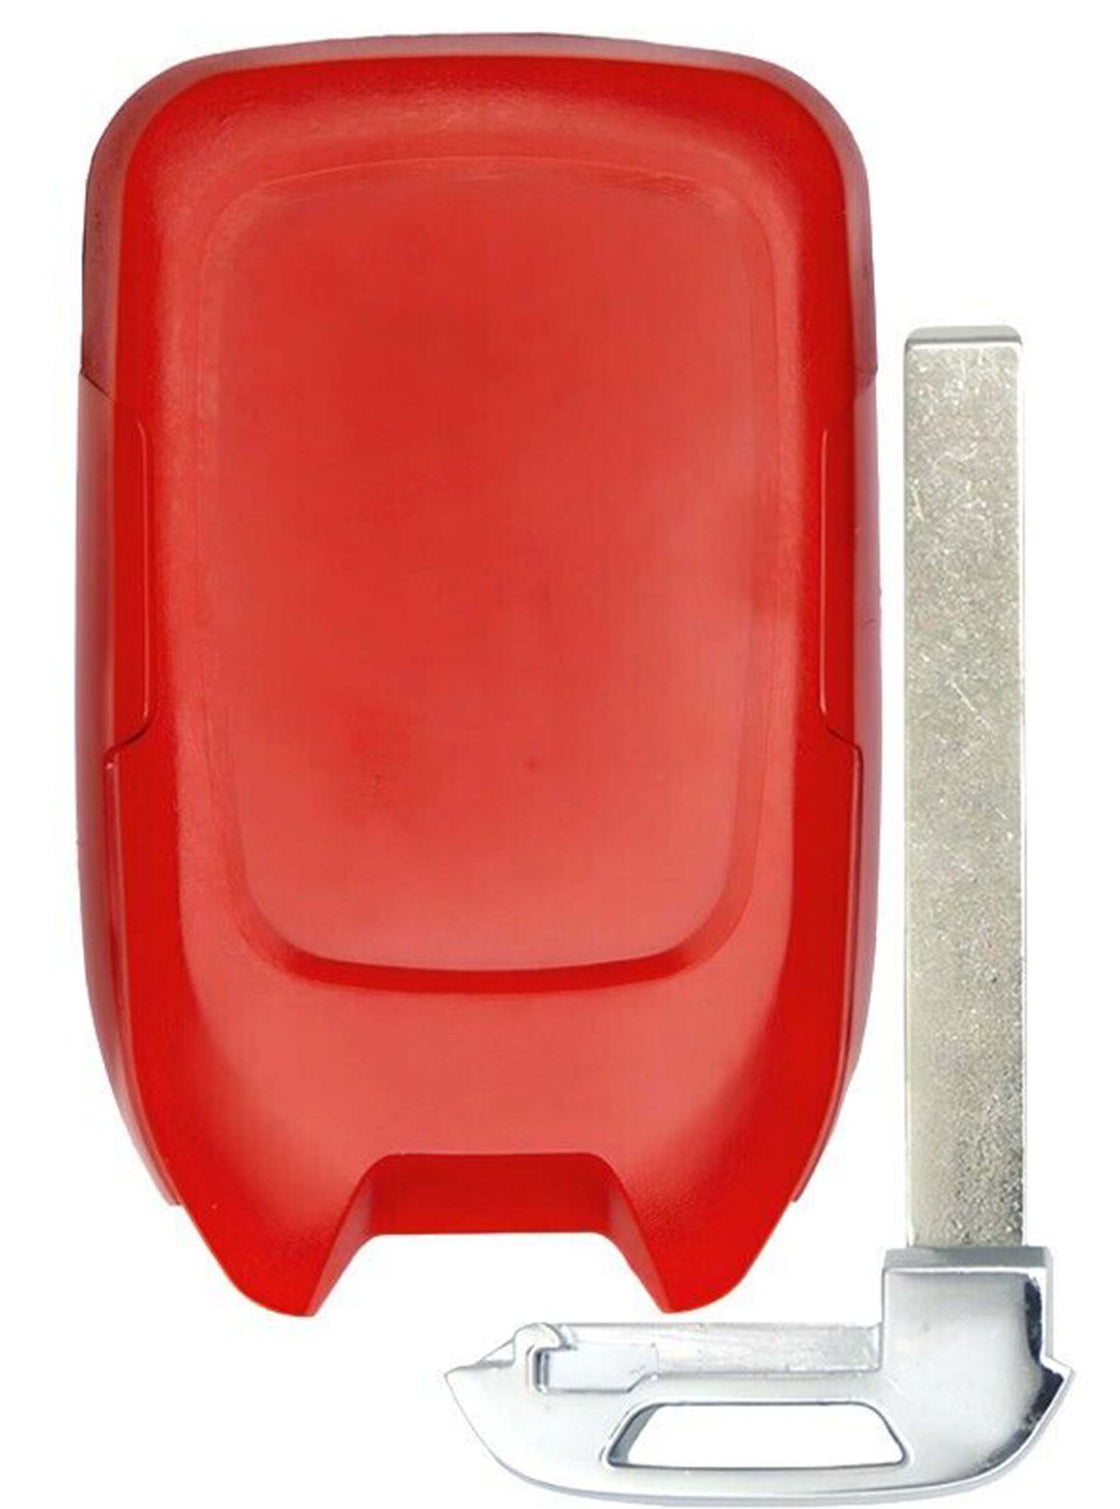 1x New Replacement Proximity Key Fob Compatible with & fit for Select GMC Vehicles. HYQ1EA ES 433 MHz - HYQ1EA-P-RED-08